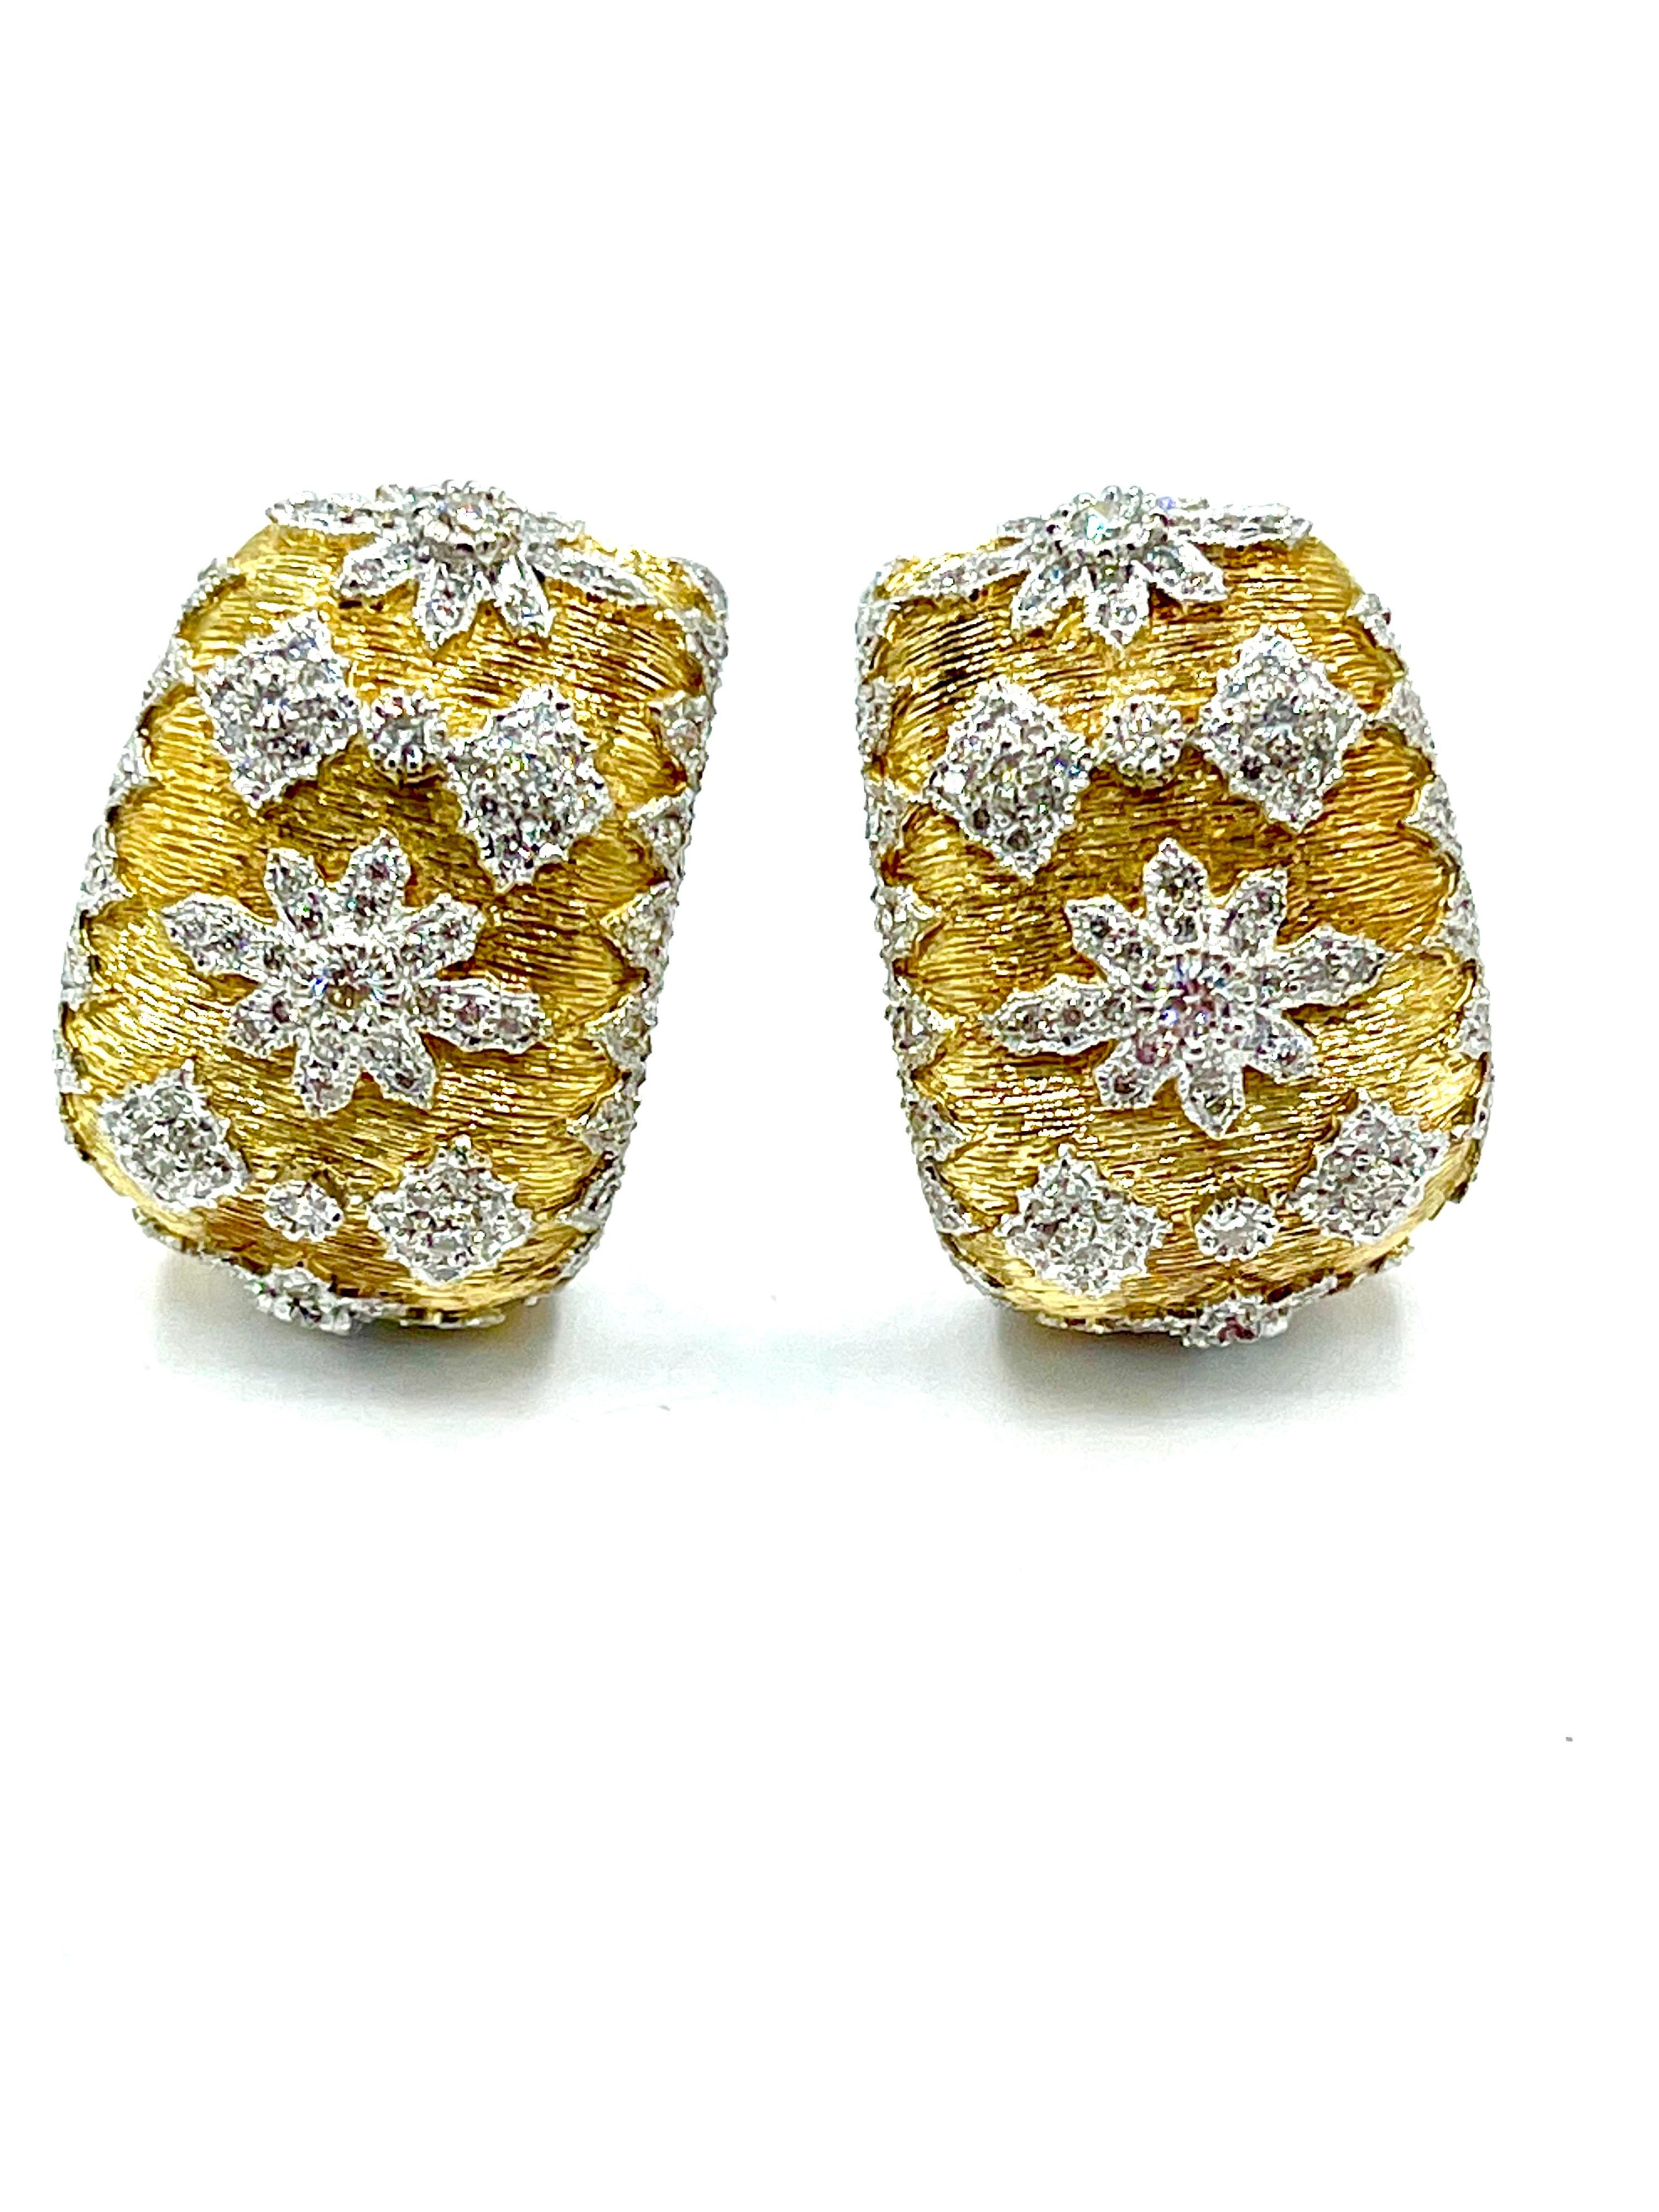 A pair of beautifully hand crafted diamond clip earrings.  The earrings contain 228 round brilliant Diamonds with a total weight of 1.71 carats.  The Diamonds are all set in 18K white gold designs, over top of the textured 18K yellow gold.  The back